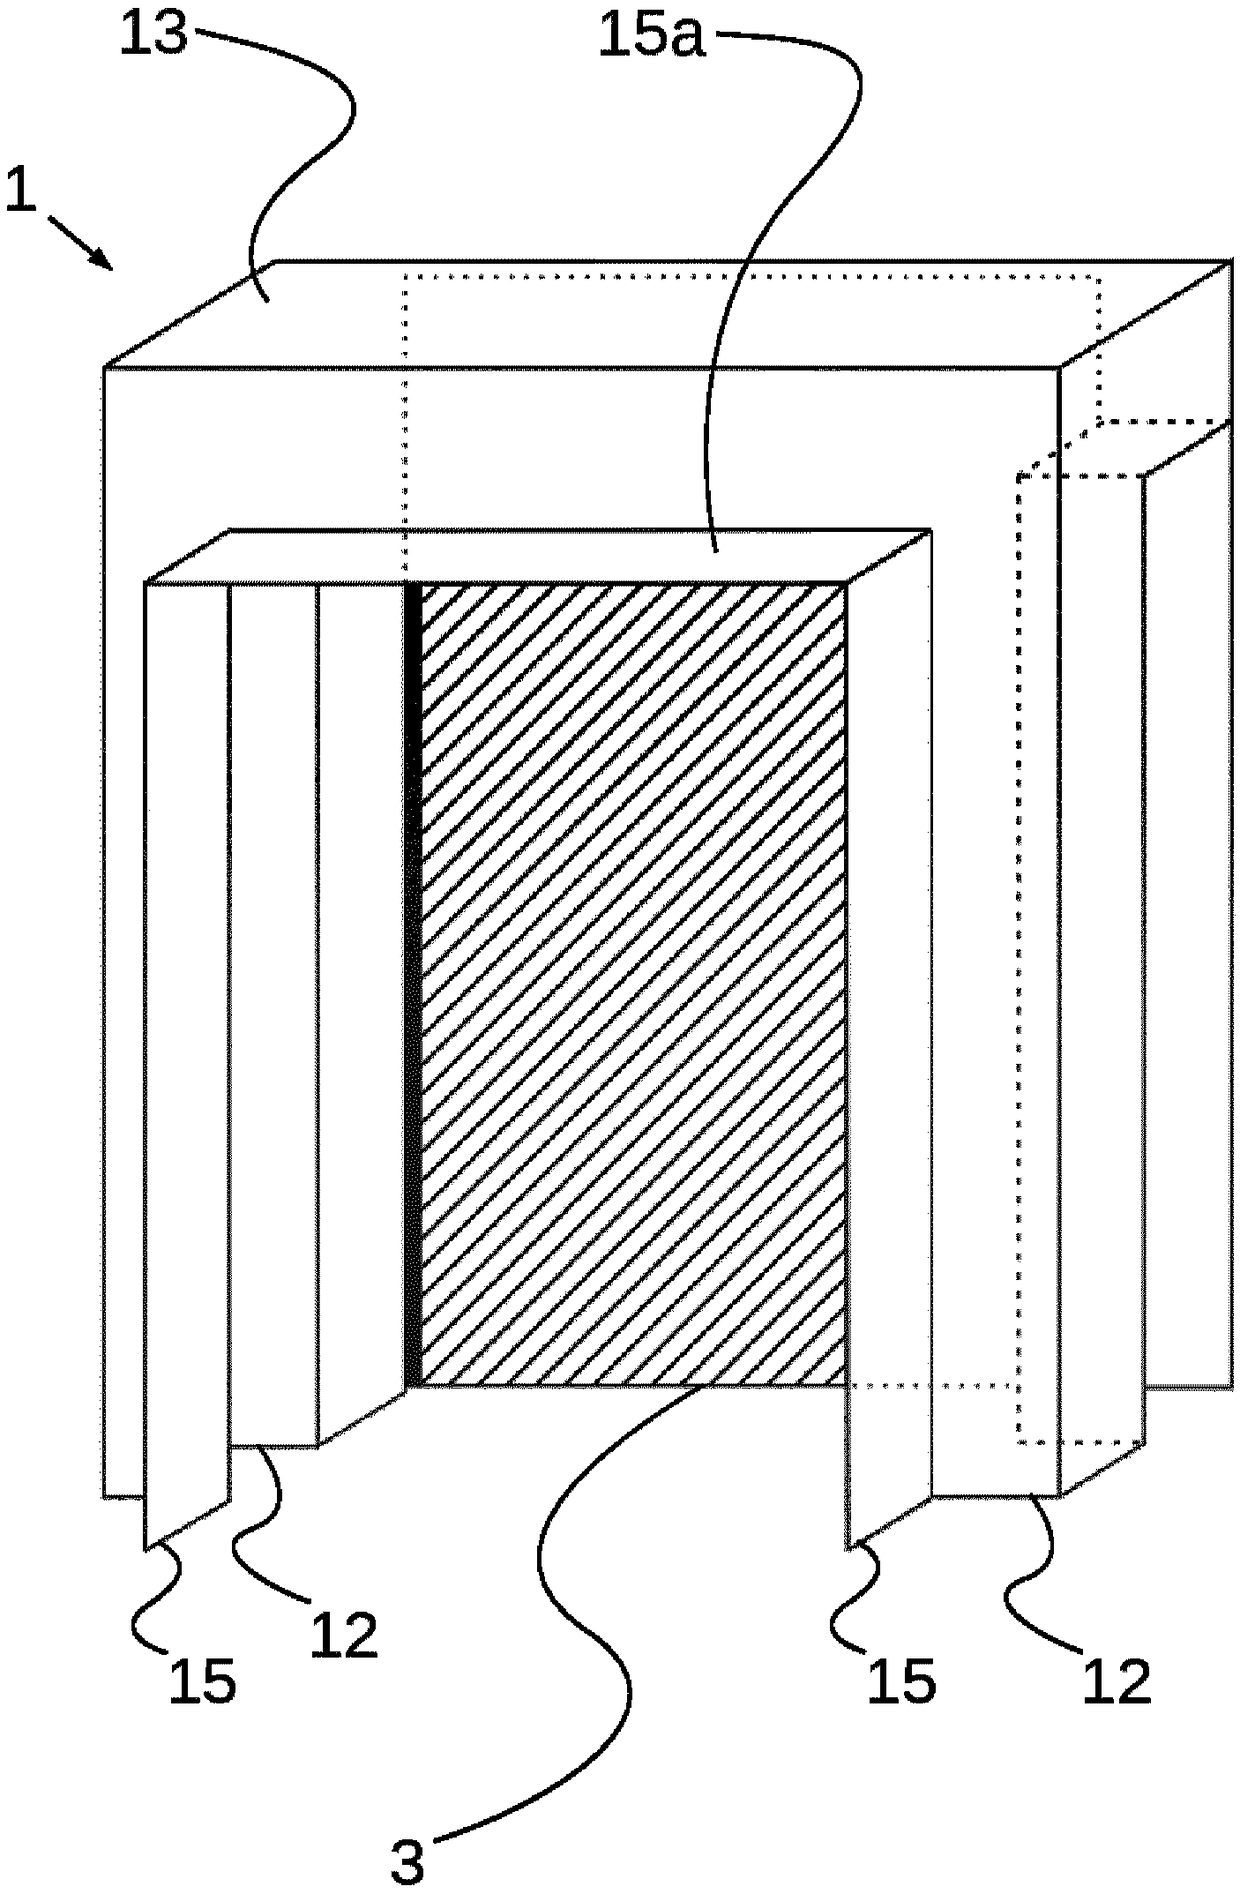 Frame for suctioning filling gases and transferring same into the gas collection chamber of the oven chamber of a stamping battery during the setting of a stamped cake in the oven chamber, with reduction of the filling emissions